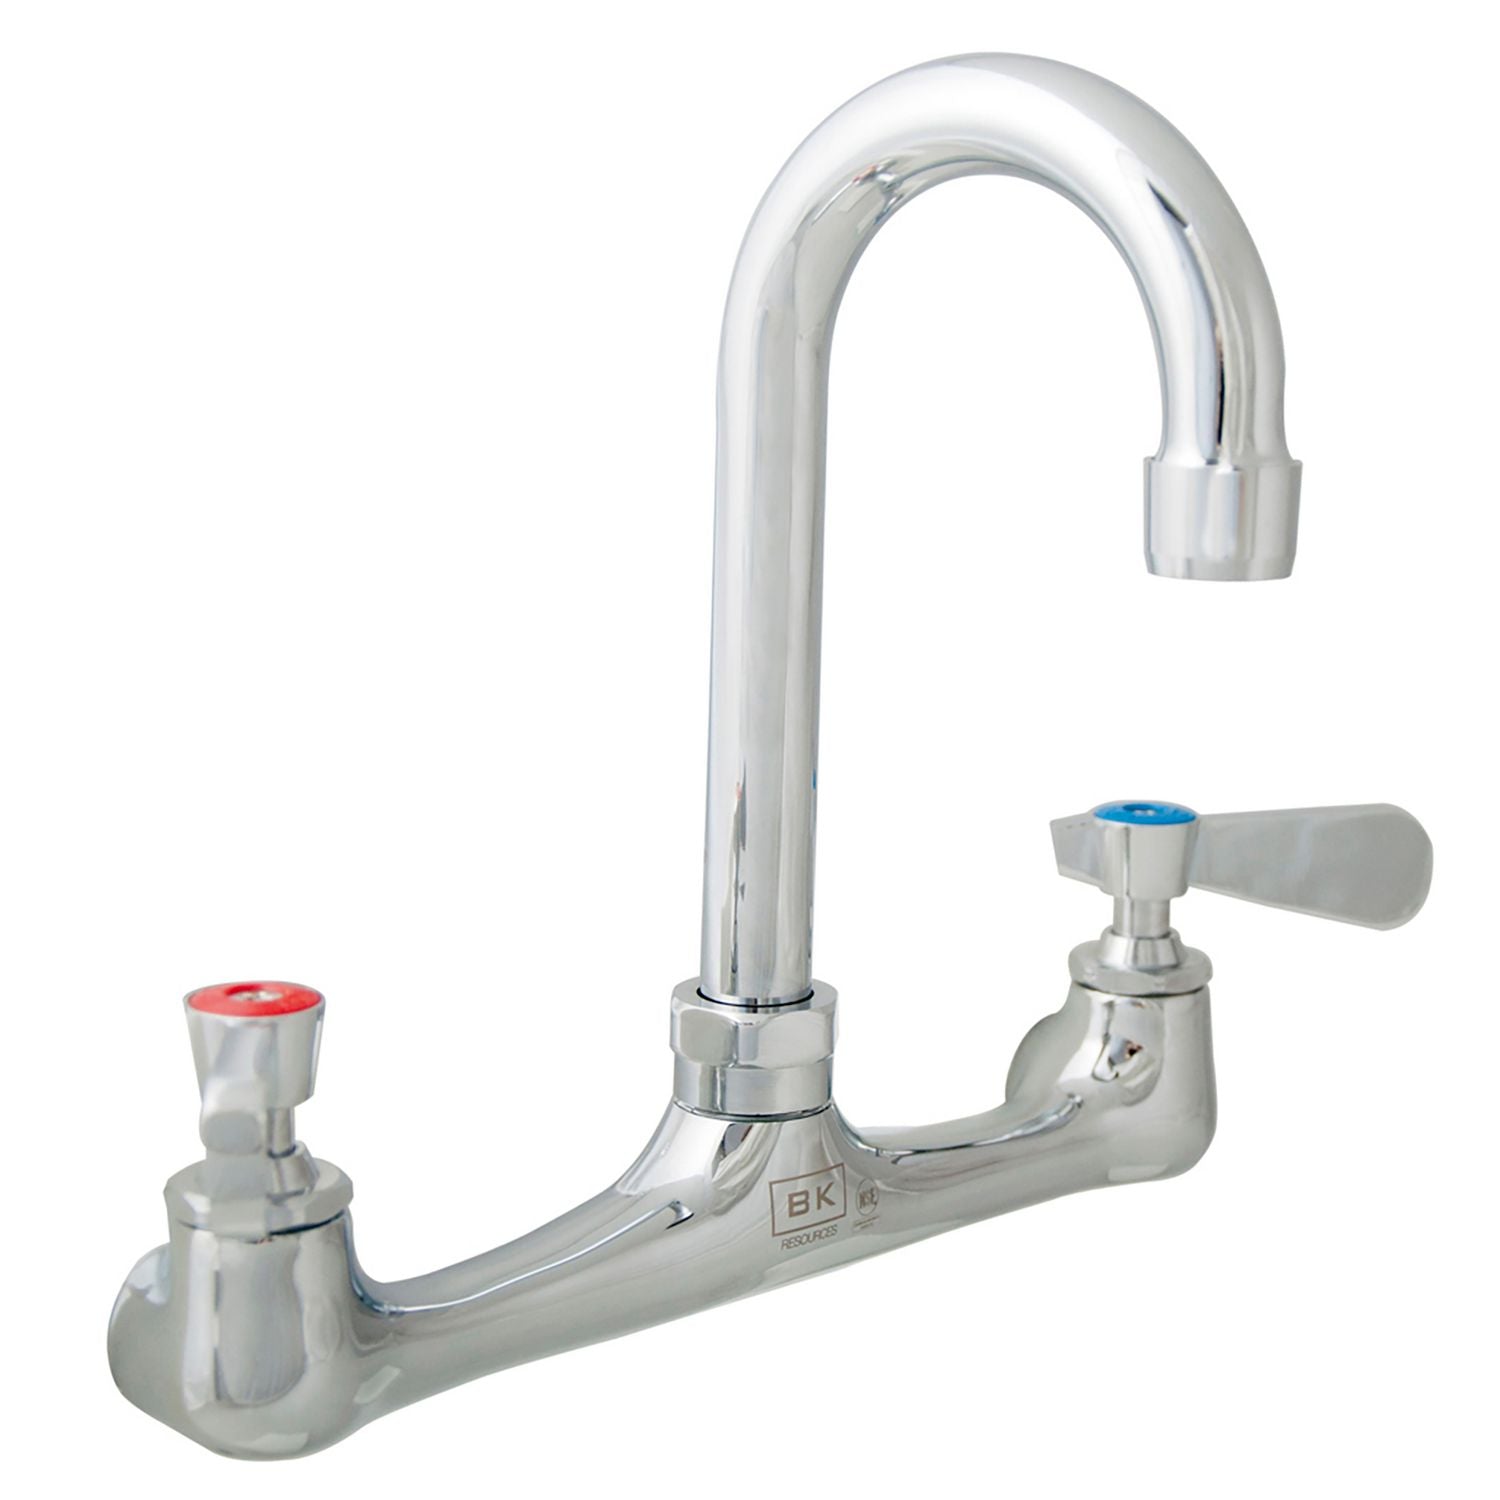 workforce-standard-duty-faucet-1238-height-8-reach-chrome-plated-brass-ships-in-4-6-business-days_bkebkfw8gm - 1